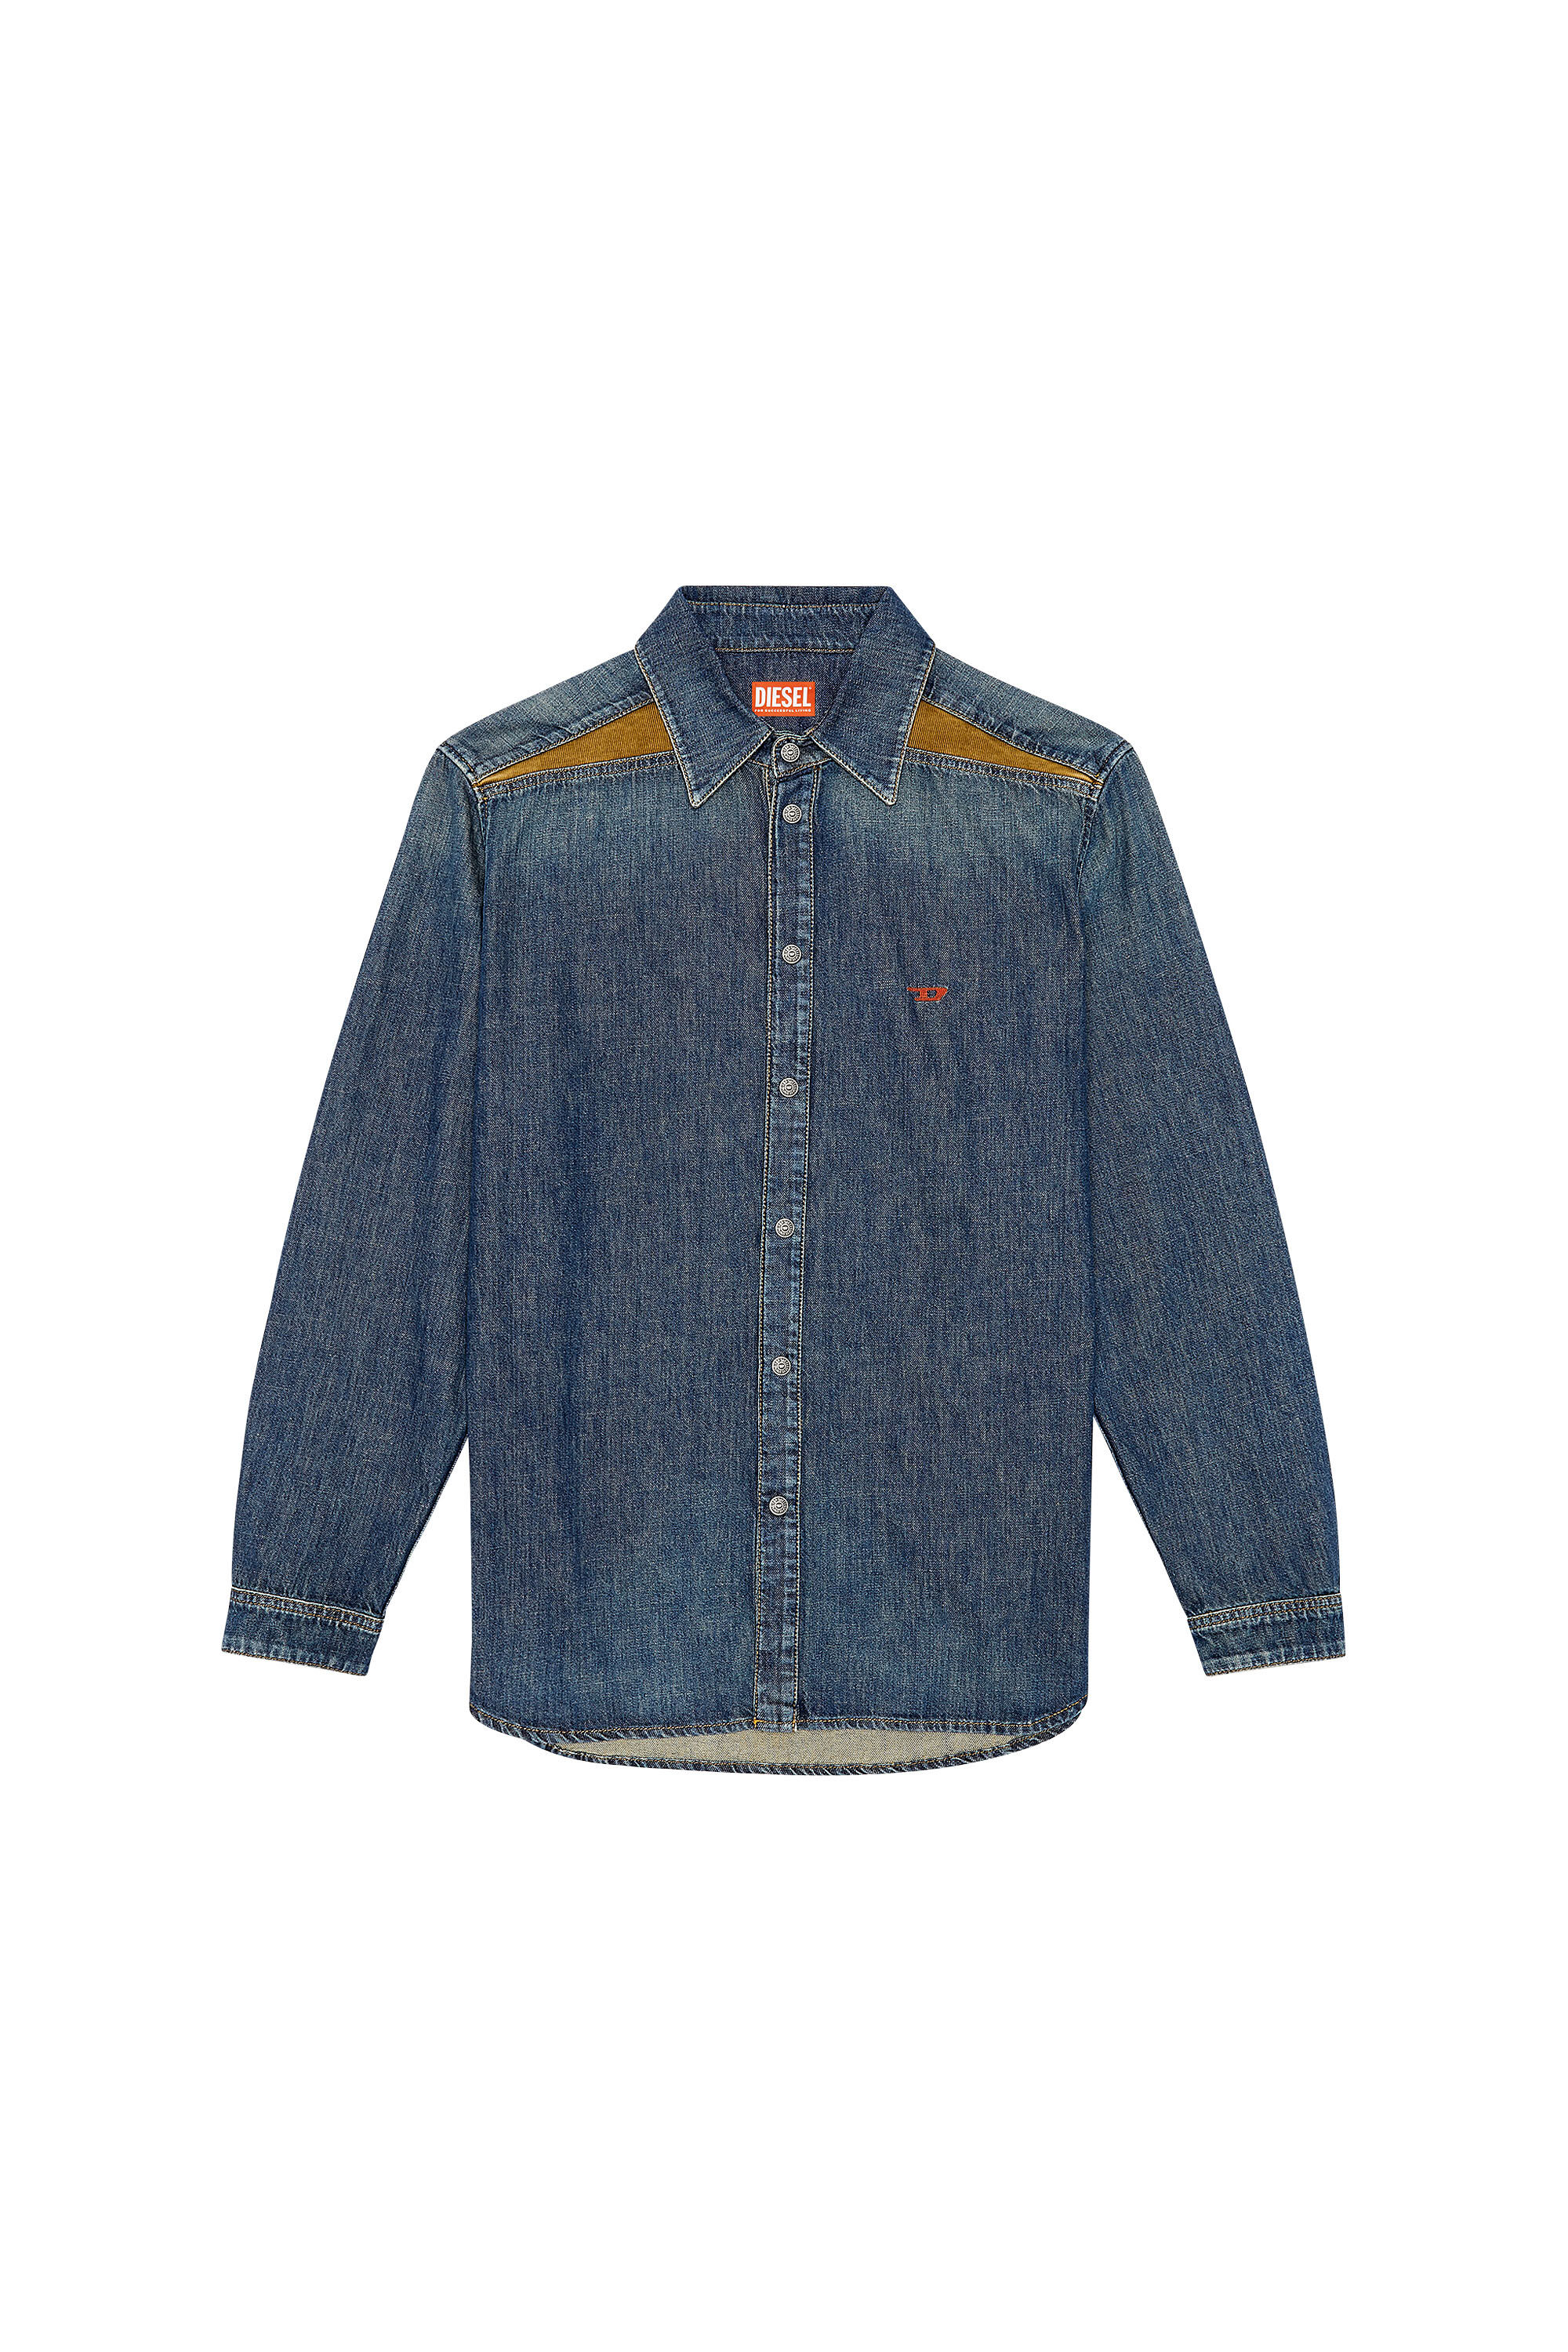 Diesel - D-SIMPLY-RS-D, Man Shirt in denim with contrasting panels in Blue - Image 3